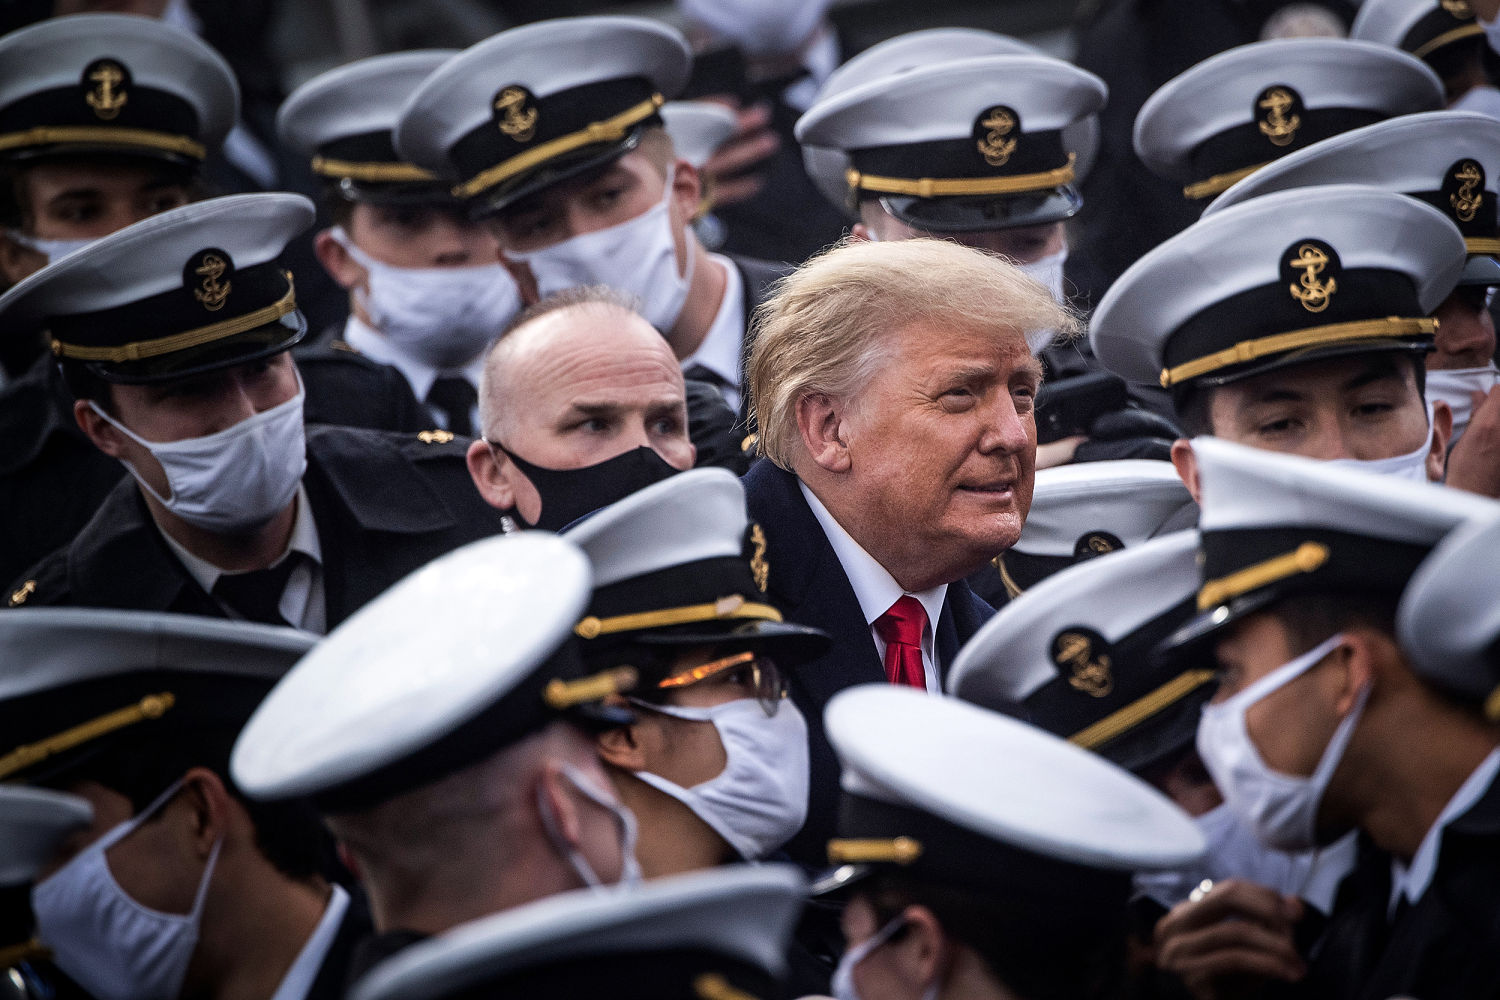 A president with 'absolute immunity' would mean disaster for our
military